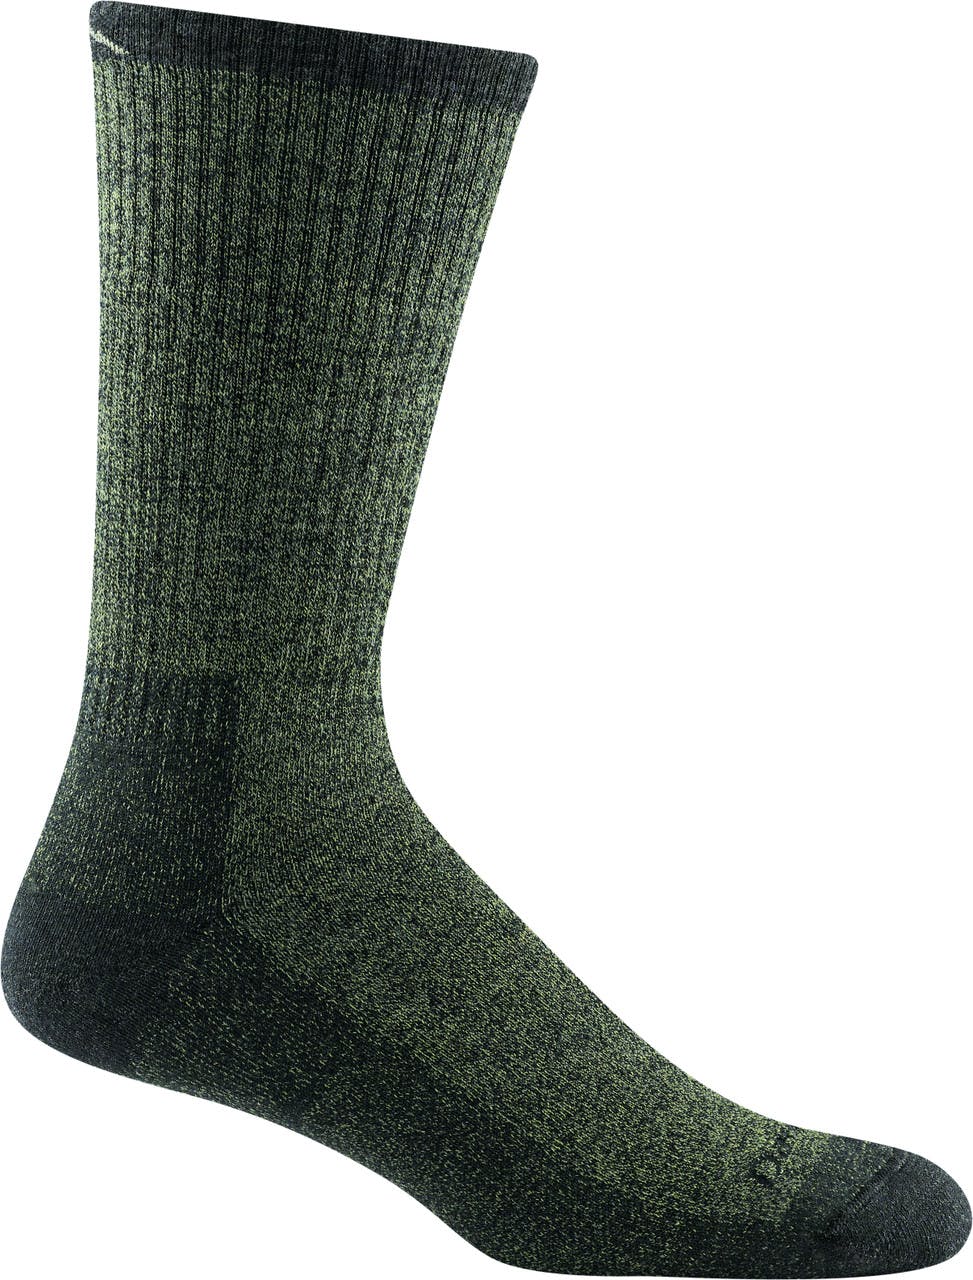 Nomad Midweight with Full Cushion Boot Socks Moss